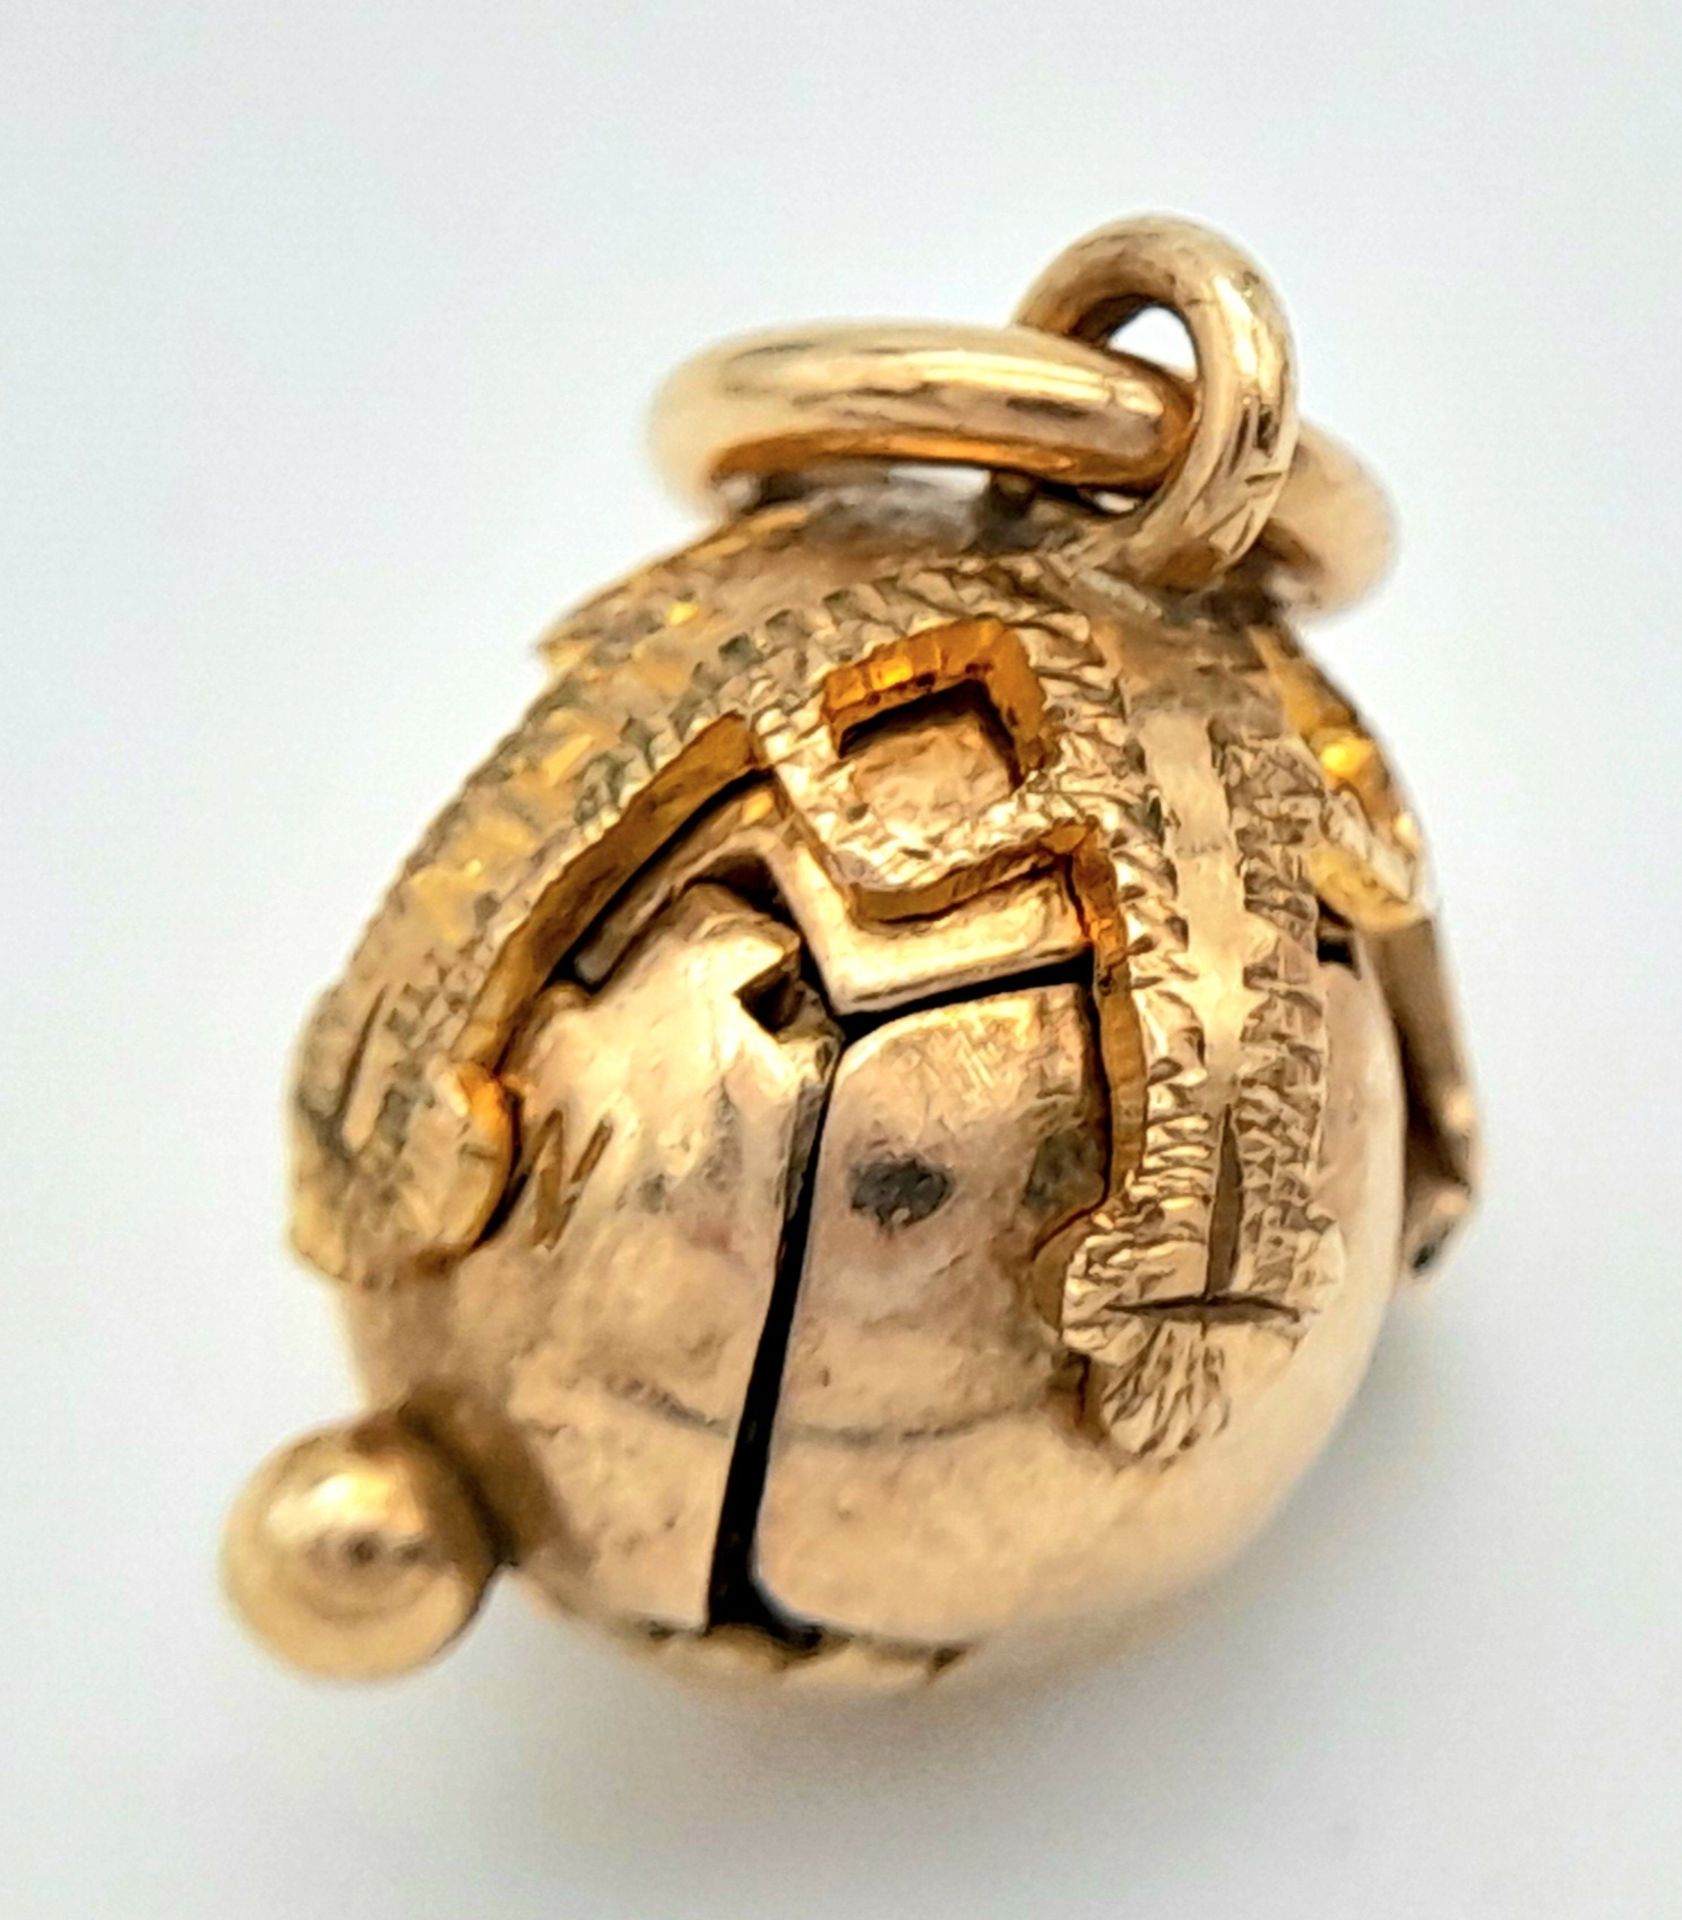 A Vintage 9K Gold Masonic Opening Orb Pendant - Silver Interior, Opens to reveal masonic symbols. - Image 2 of 6